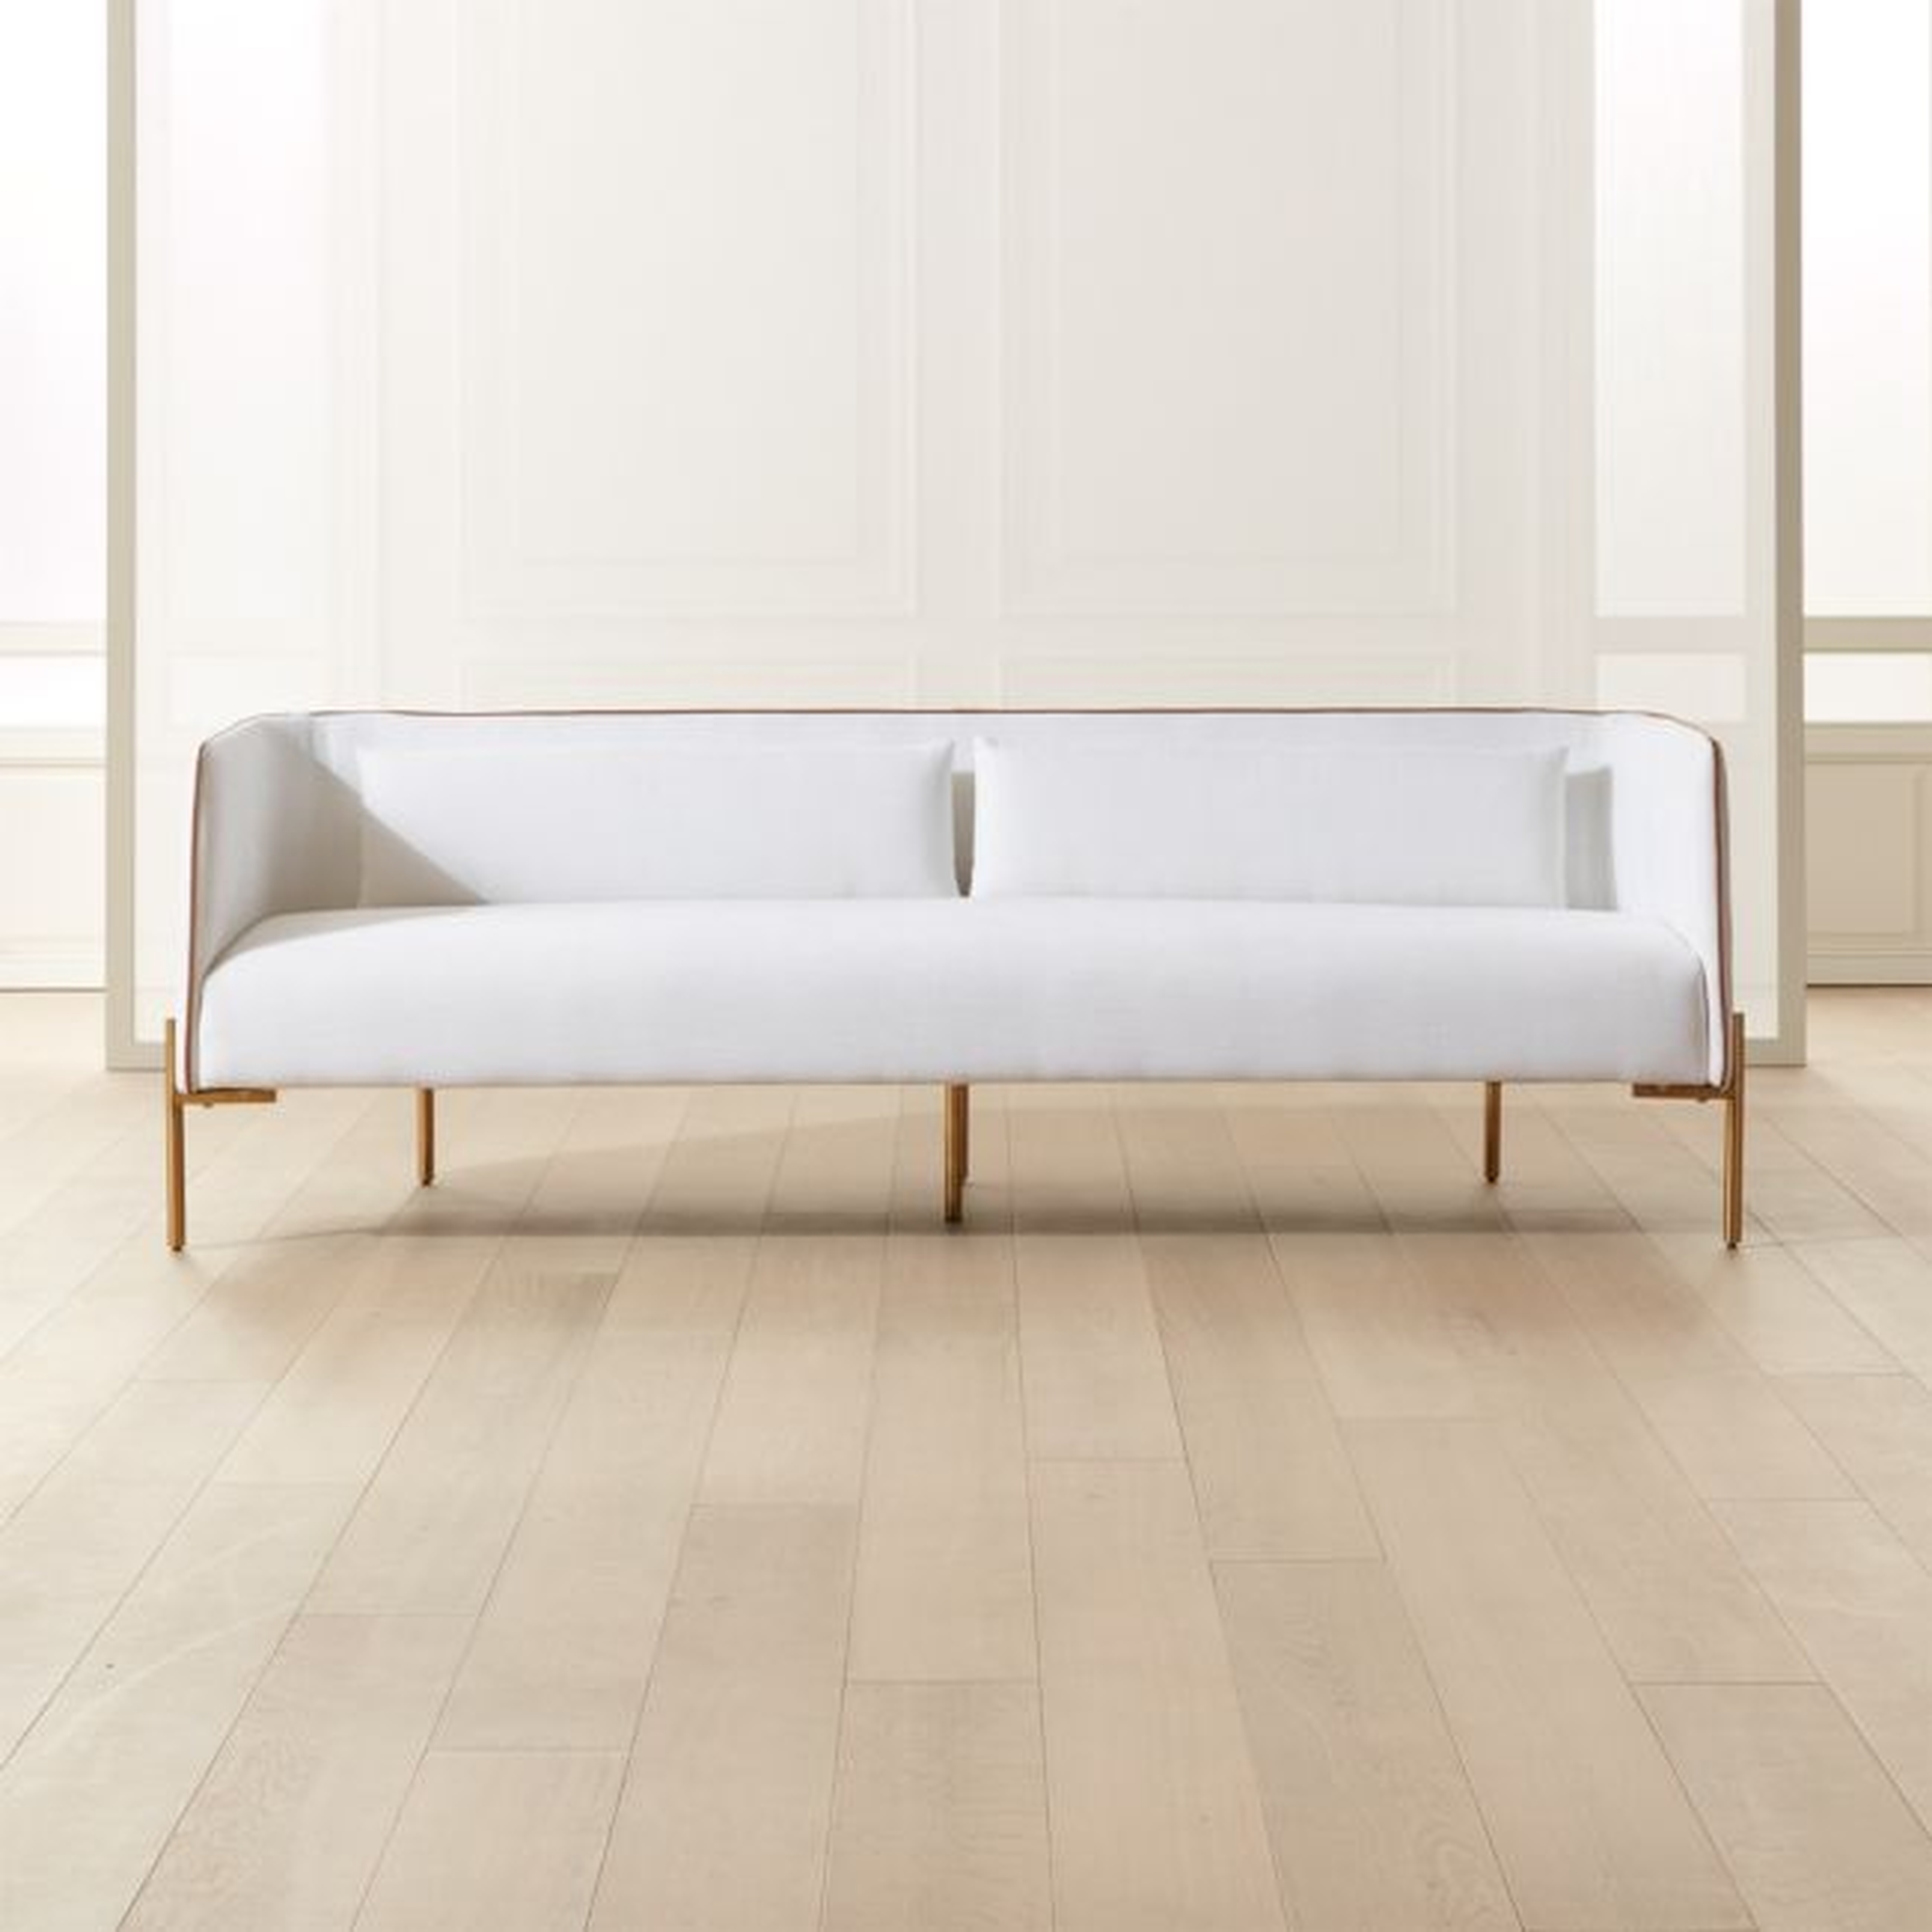 Colette White Sofa with Faux Leather Piping - CB2